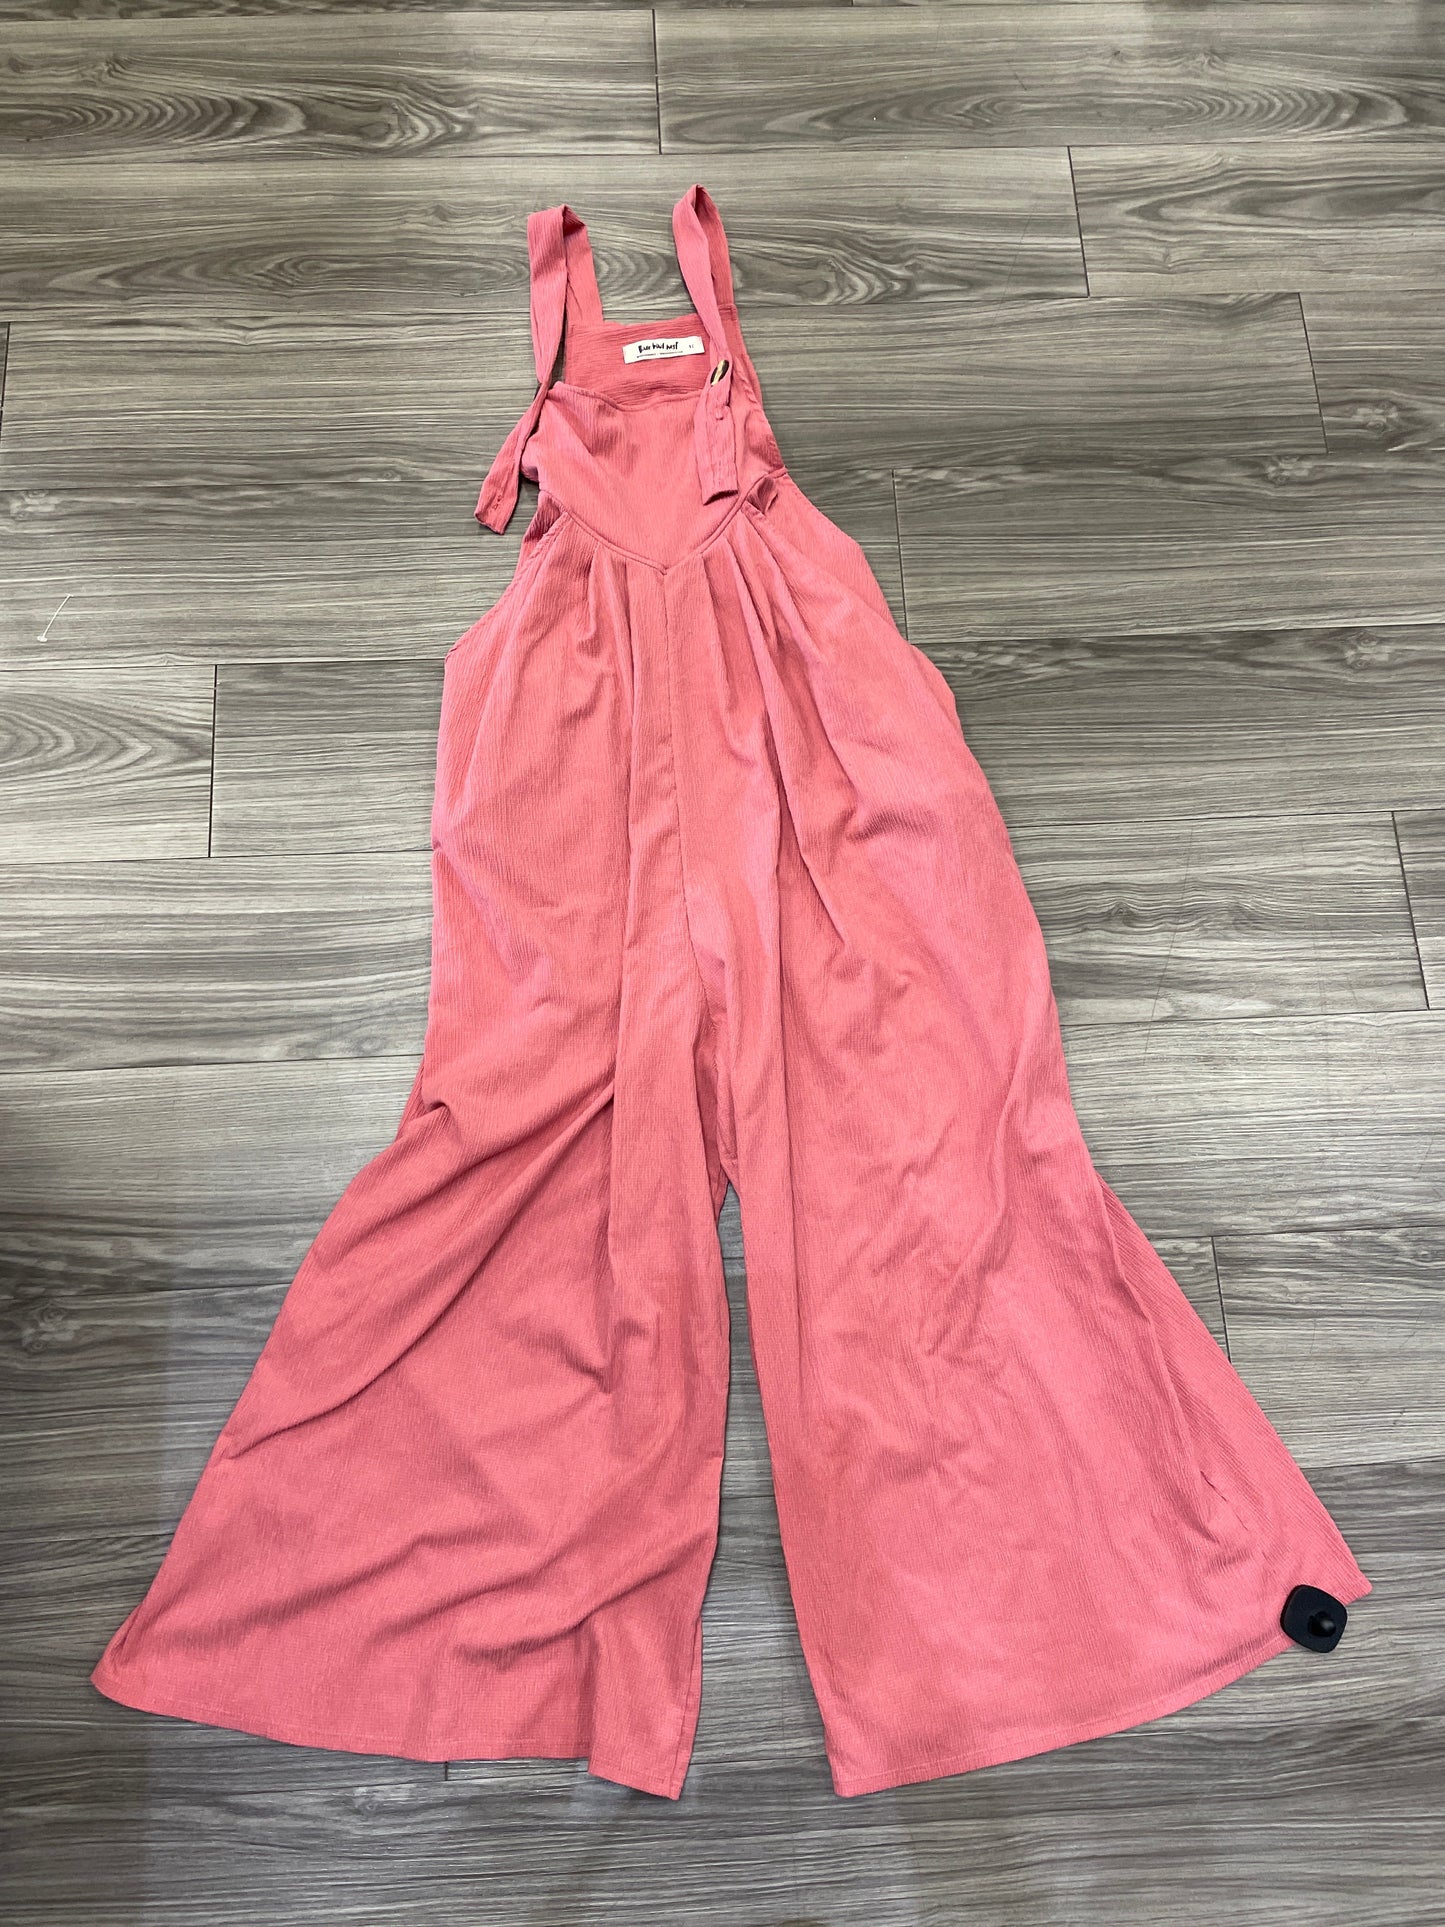 Pink Overalls Clothes Mentor, Size Xl